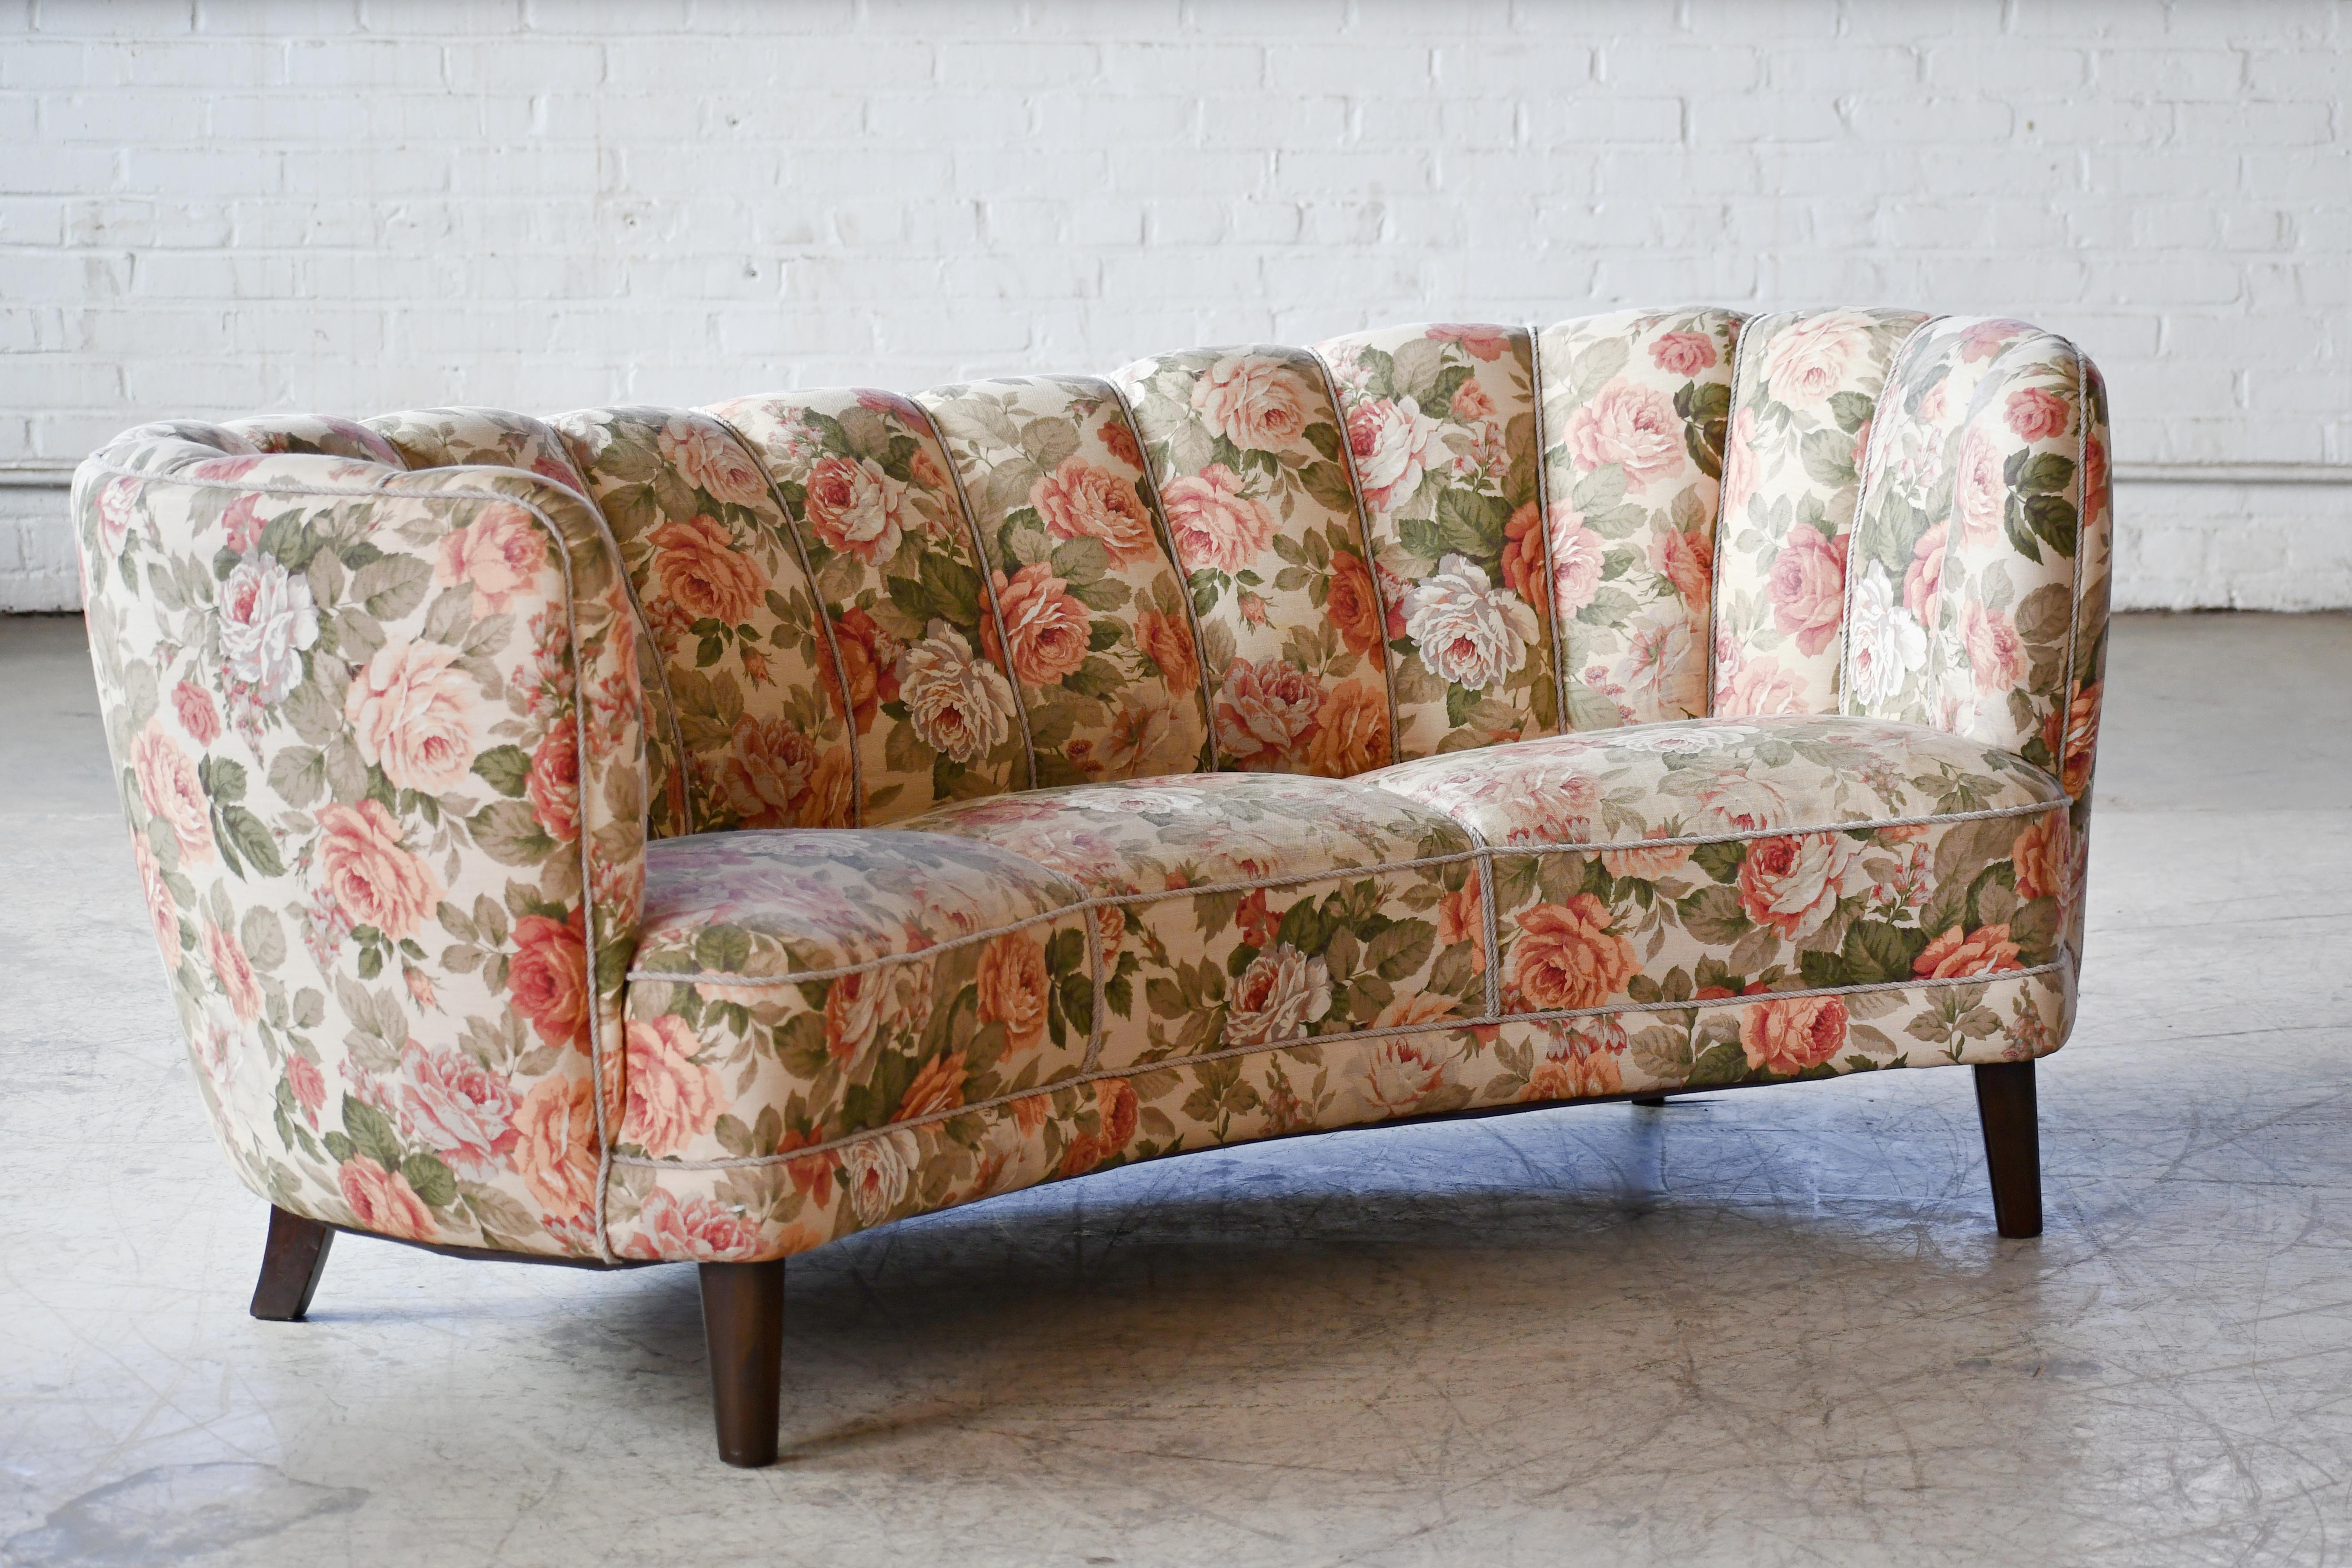 Mid-20th Century Danish 1940s Large Banana Form Curved Sofa in Floral Fabric For Sale